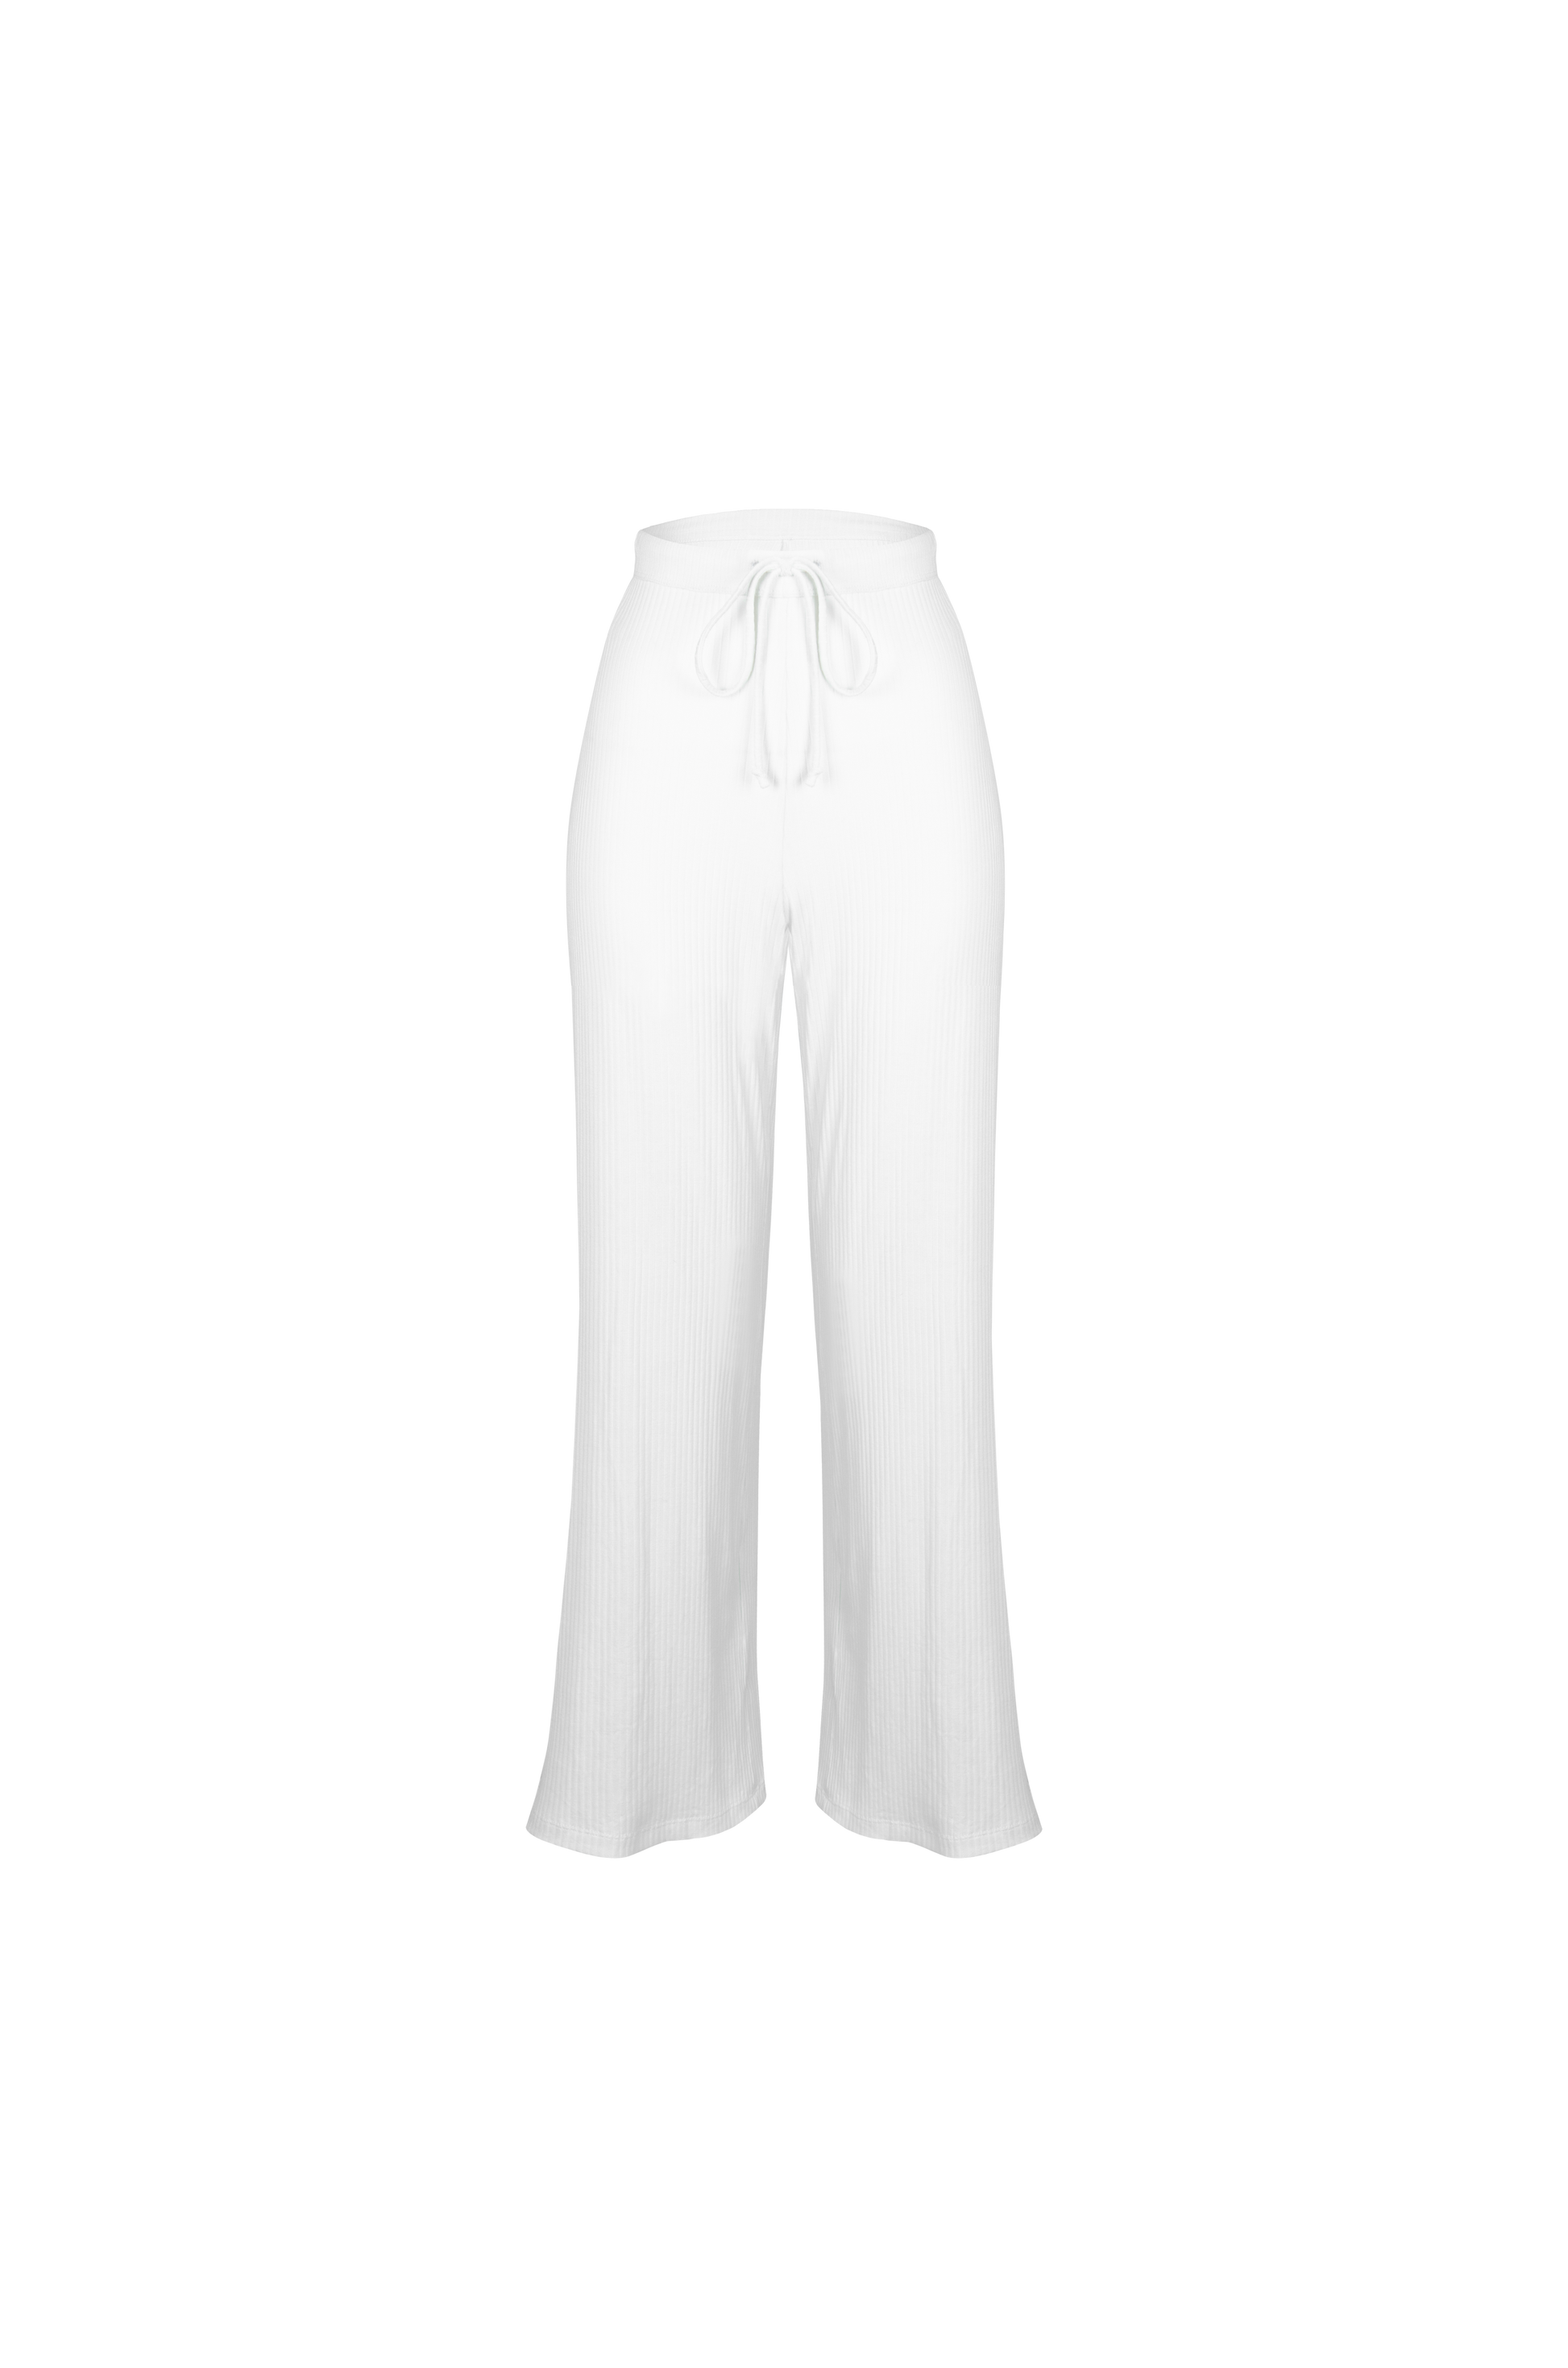 Luna Pants White - APPAREL THIS IS A LOVE SONG